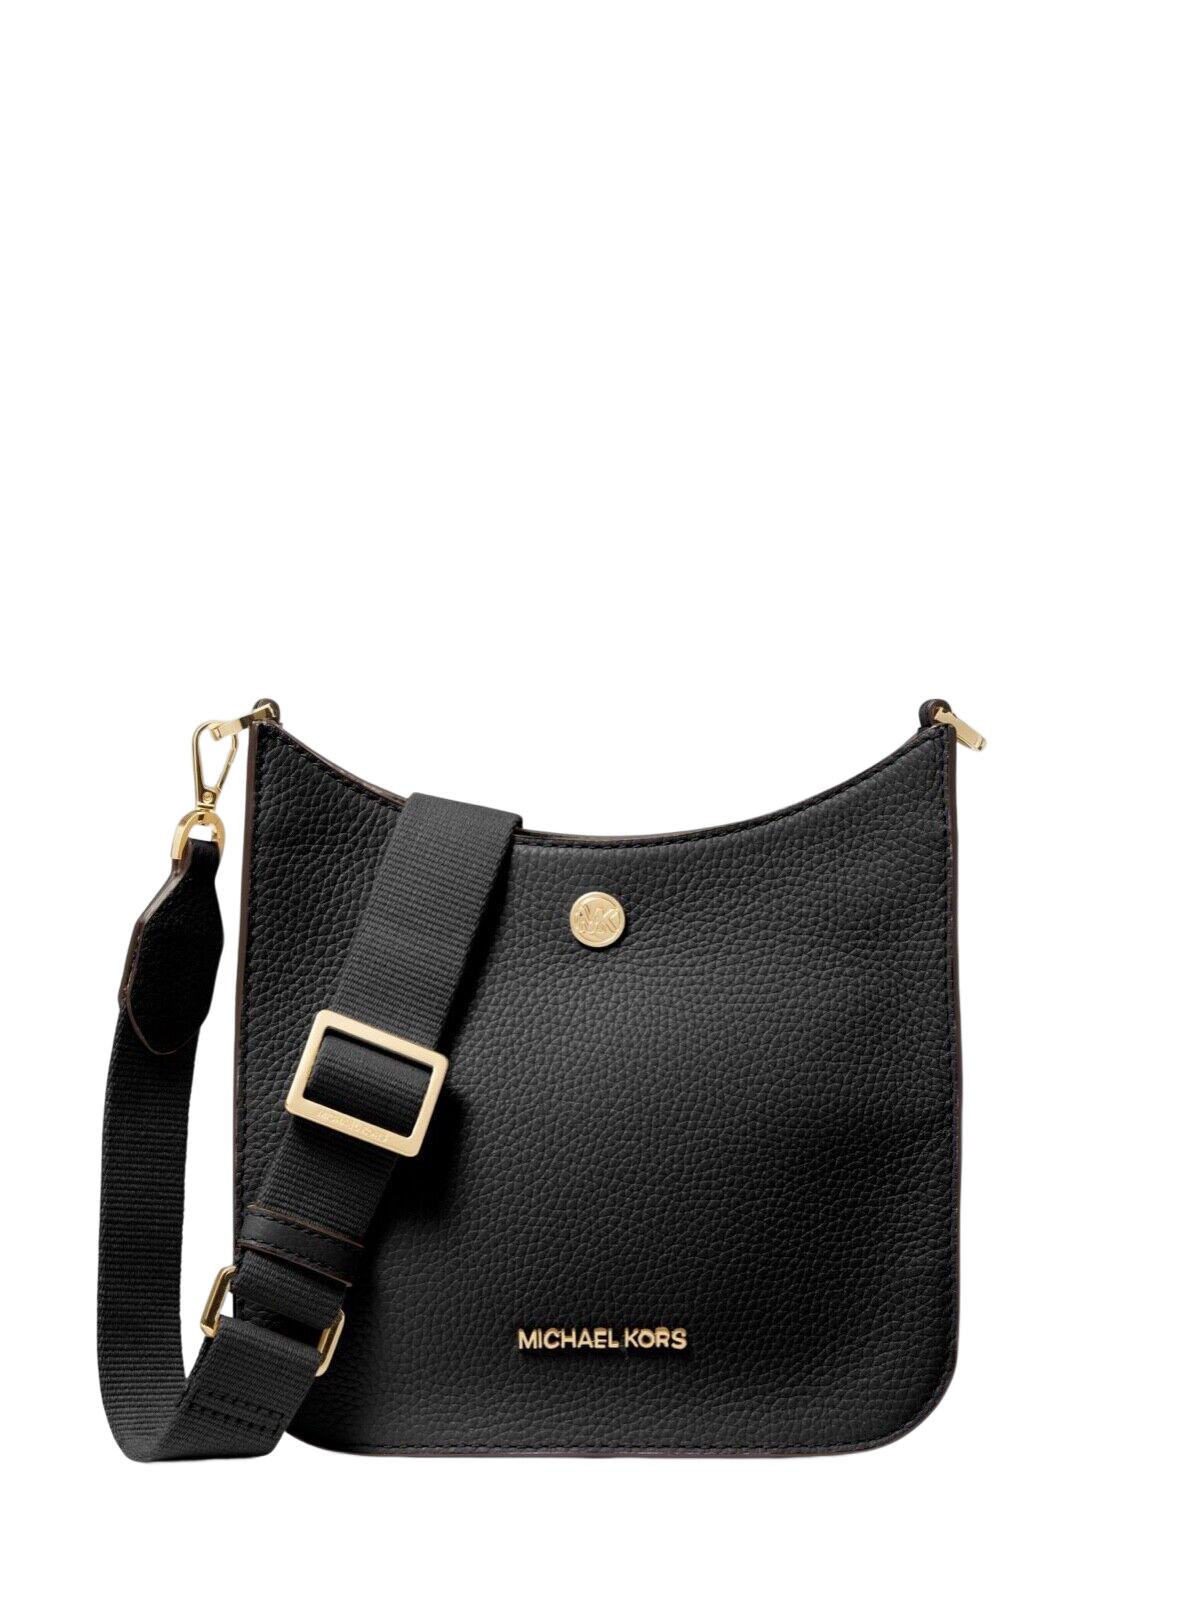 Michael Kors Briley Small Pebbled Leather Messenger Bag in Black | Lyst